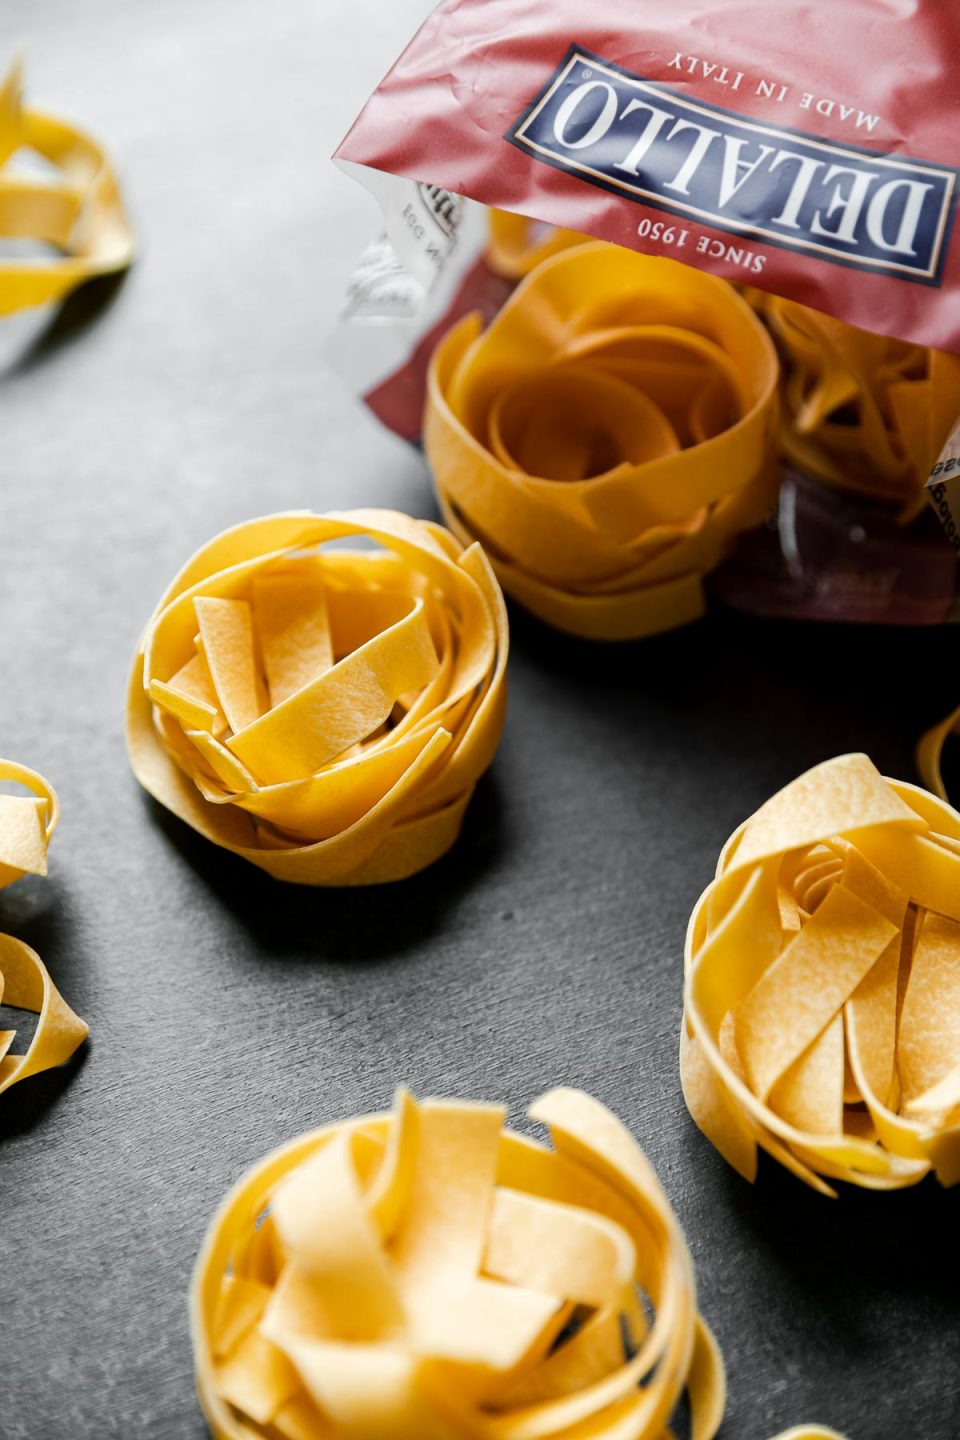 Portion-sized nests of dried DeLallo pappardelle noodles arranged on a dark textured surface resting alongside an opened bag of DeLallo Egg Pappardelle noodles.